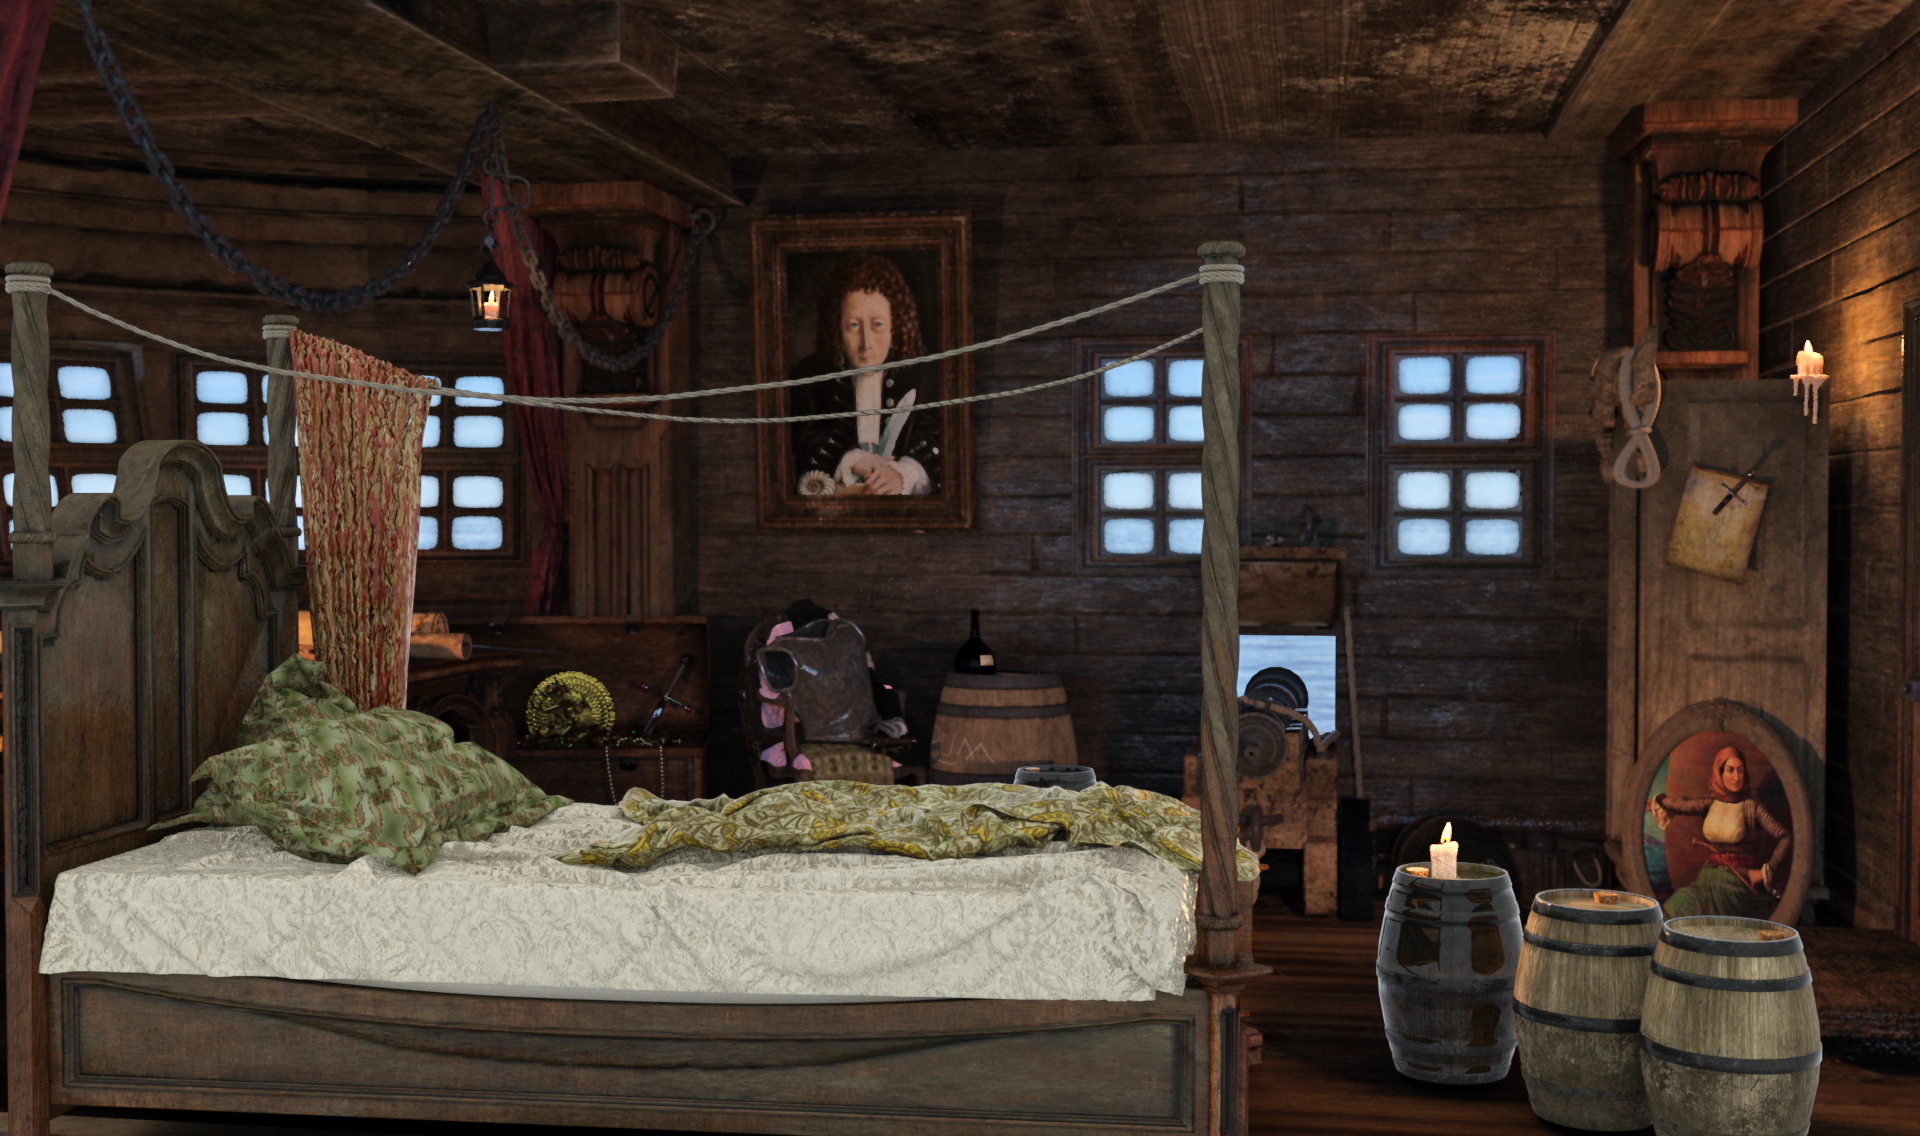 INT. PIRATES BEDROOM 1 – DAY